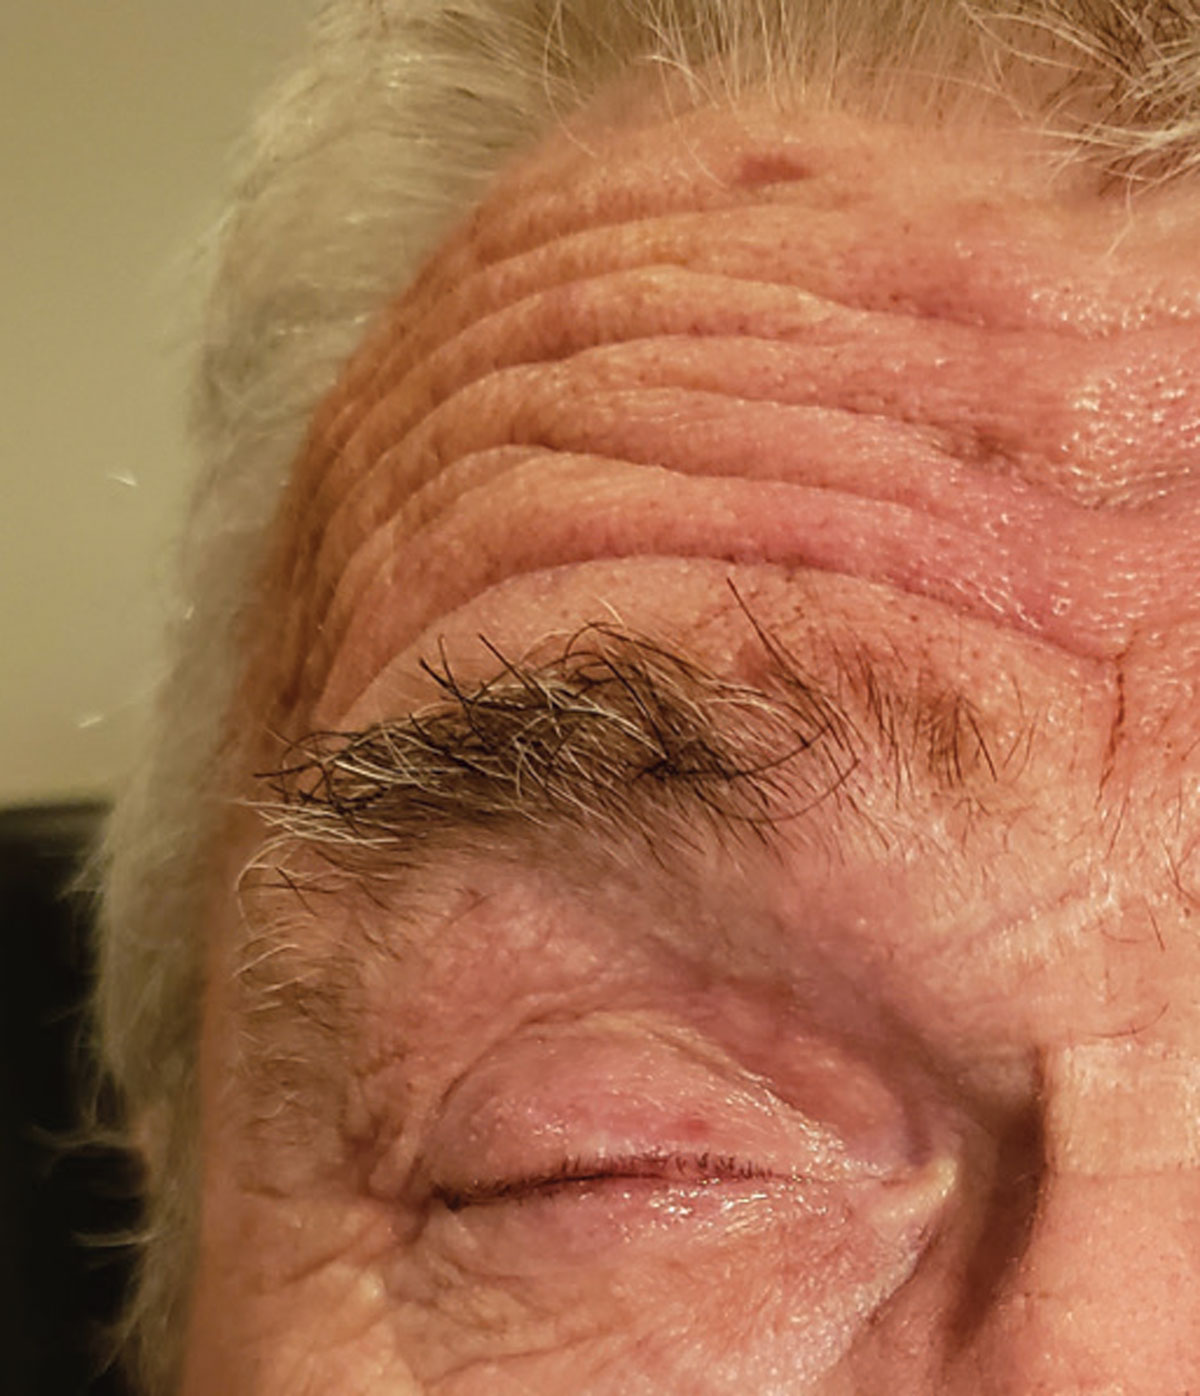 Even mild zoster lesions, as seen on the forehead, can cause severe PHN.